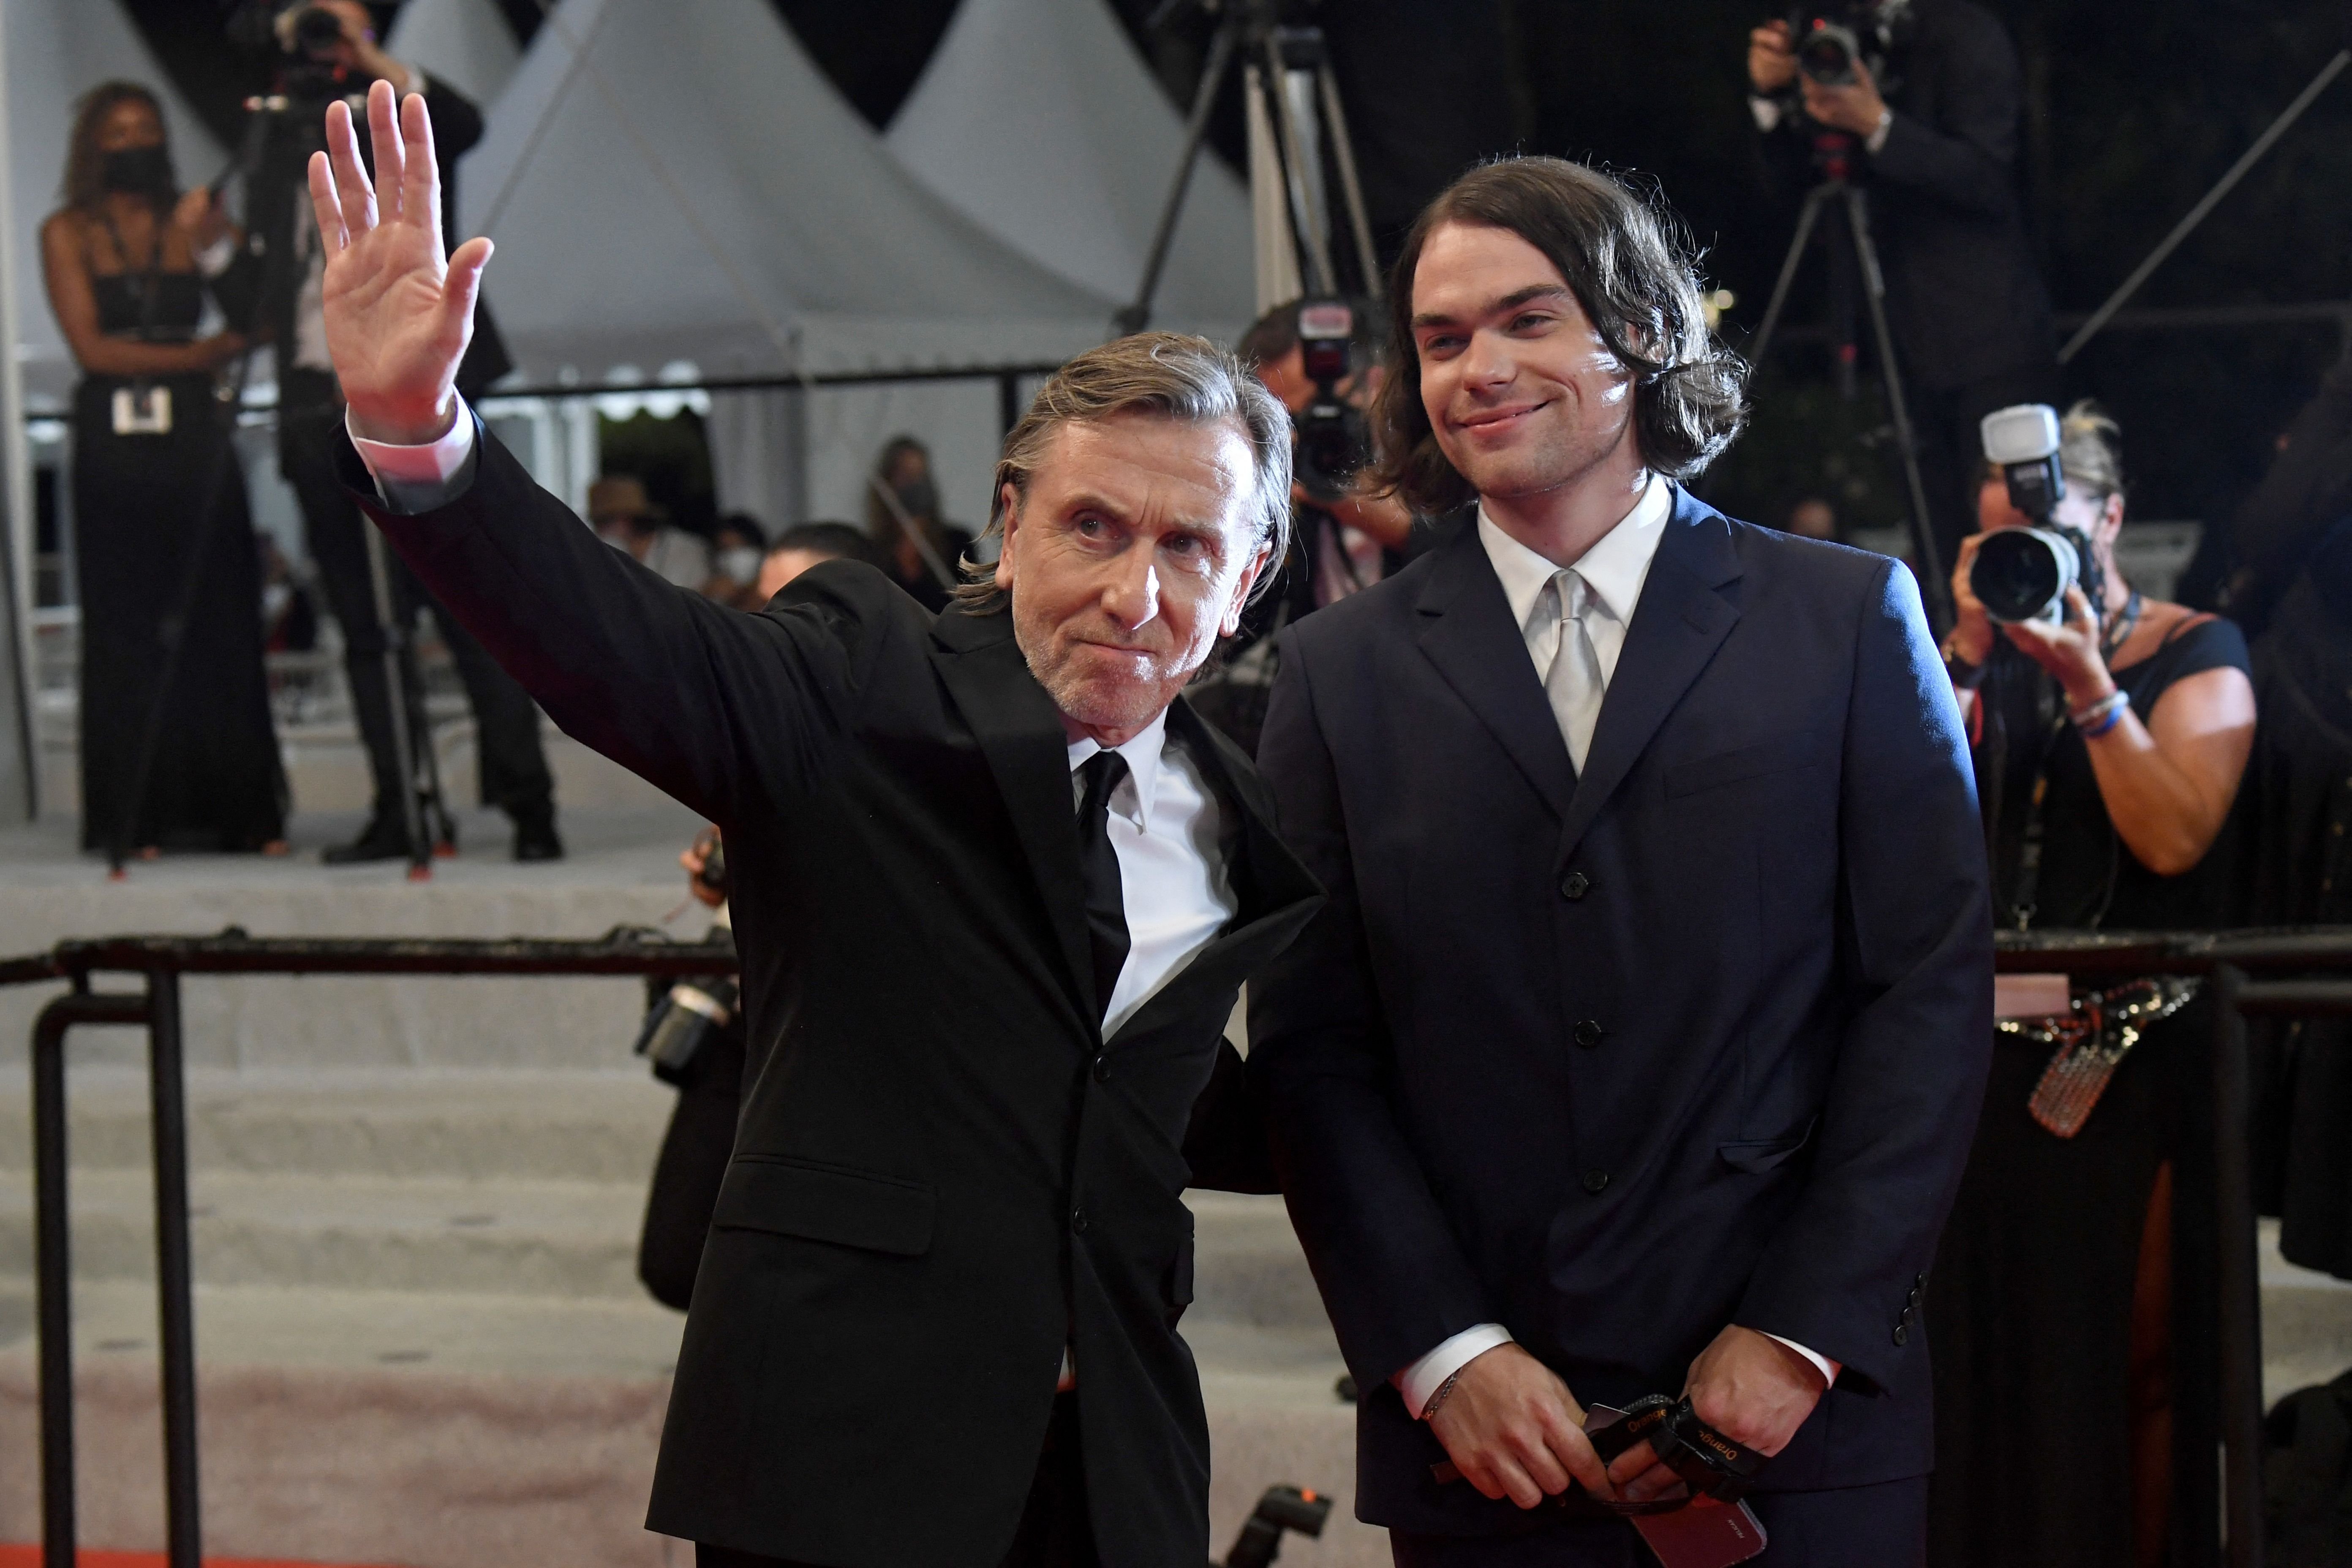 British actor Tim Roth (L) waves as he arrives with his son Michael Cormac Roth for the screening of the film "Bergman Island" at the 74th edition of the Cannes Film Festival in Cannes, southern France, on July 11, 2021. | Source: Getty Images